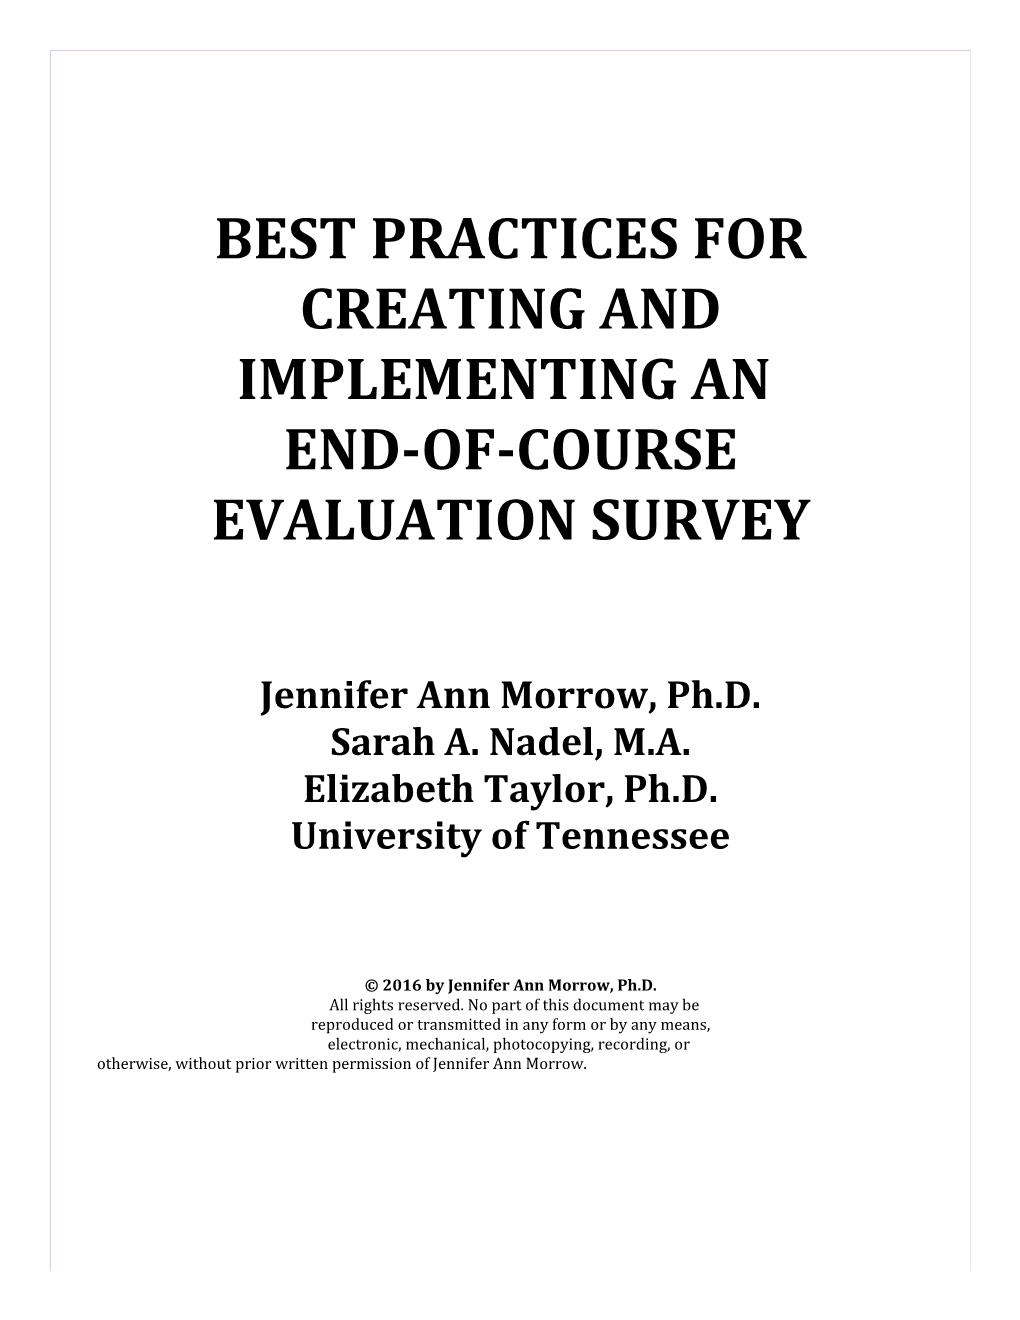 AAHLE 2016: Best Practices for Creating and Implementing an EOC Evaluation Survey